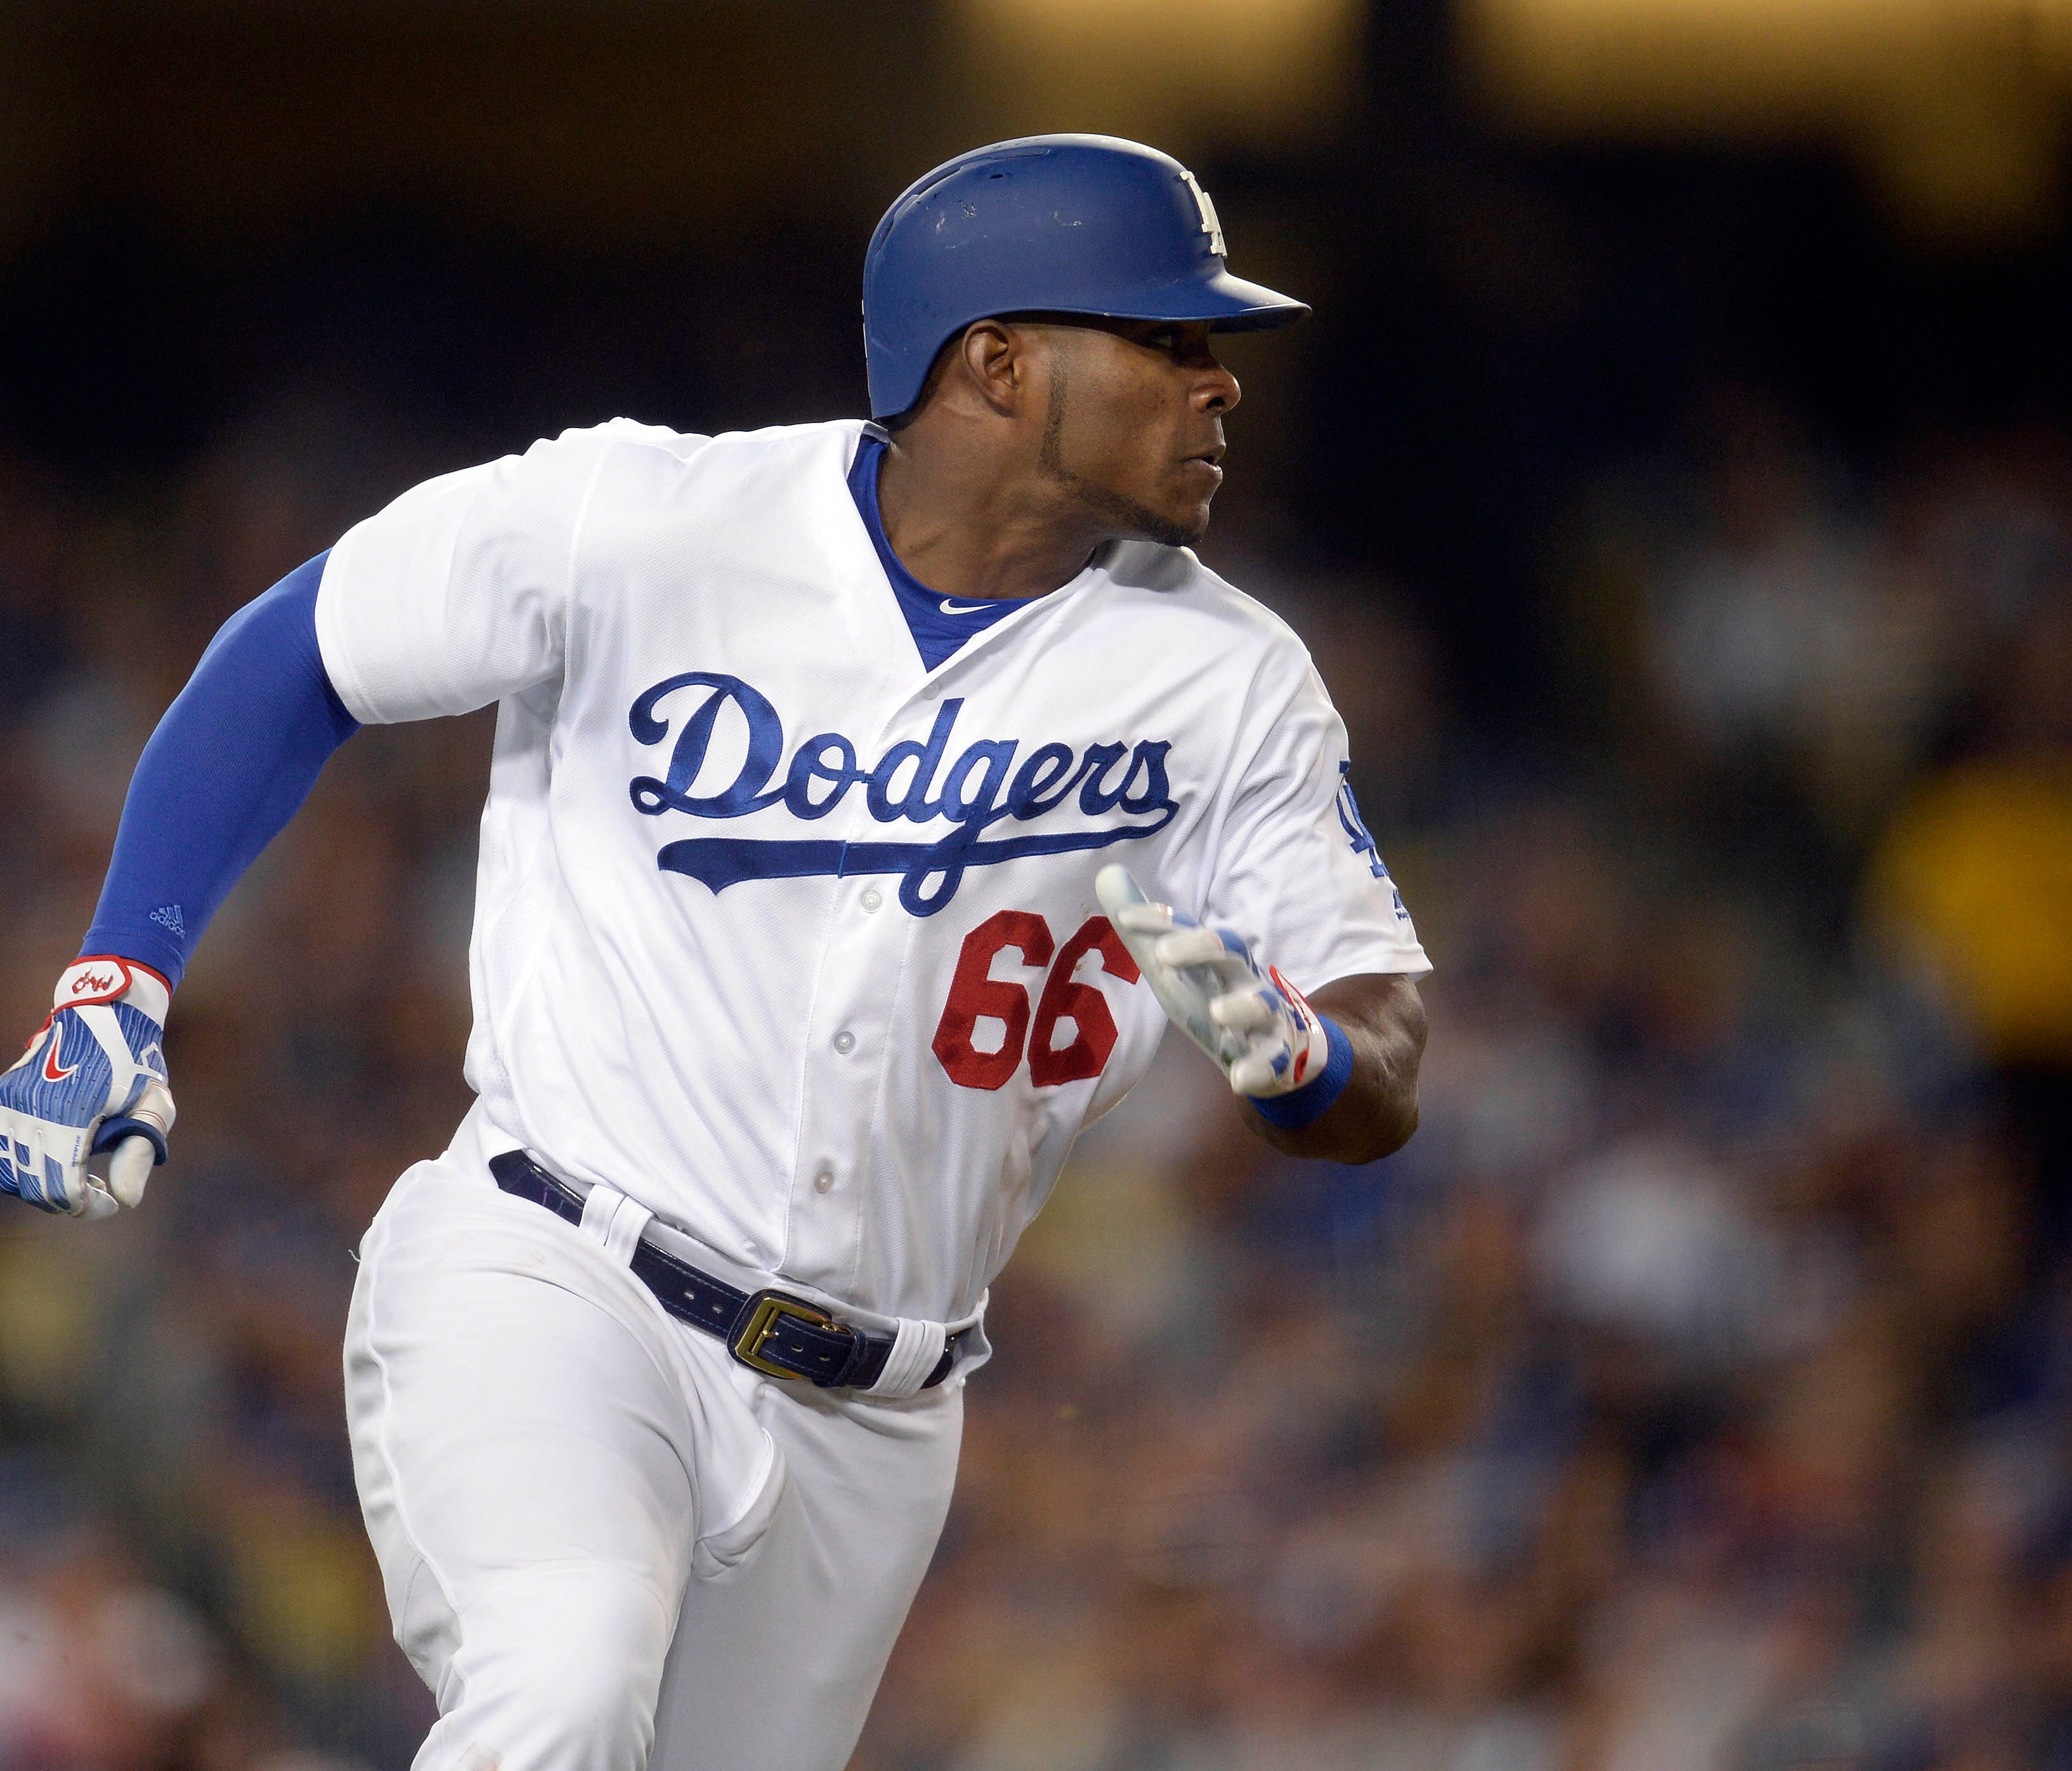 Yasiel Puig has been a force at the bottom of the Dodgers lineup. Can he stay focused and productive all October?